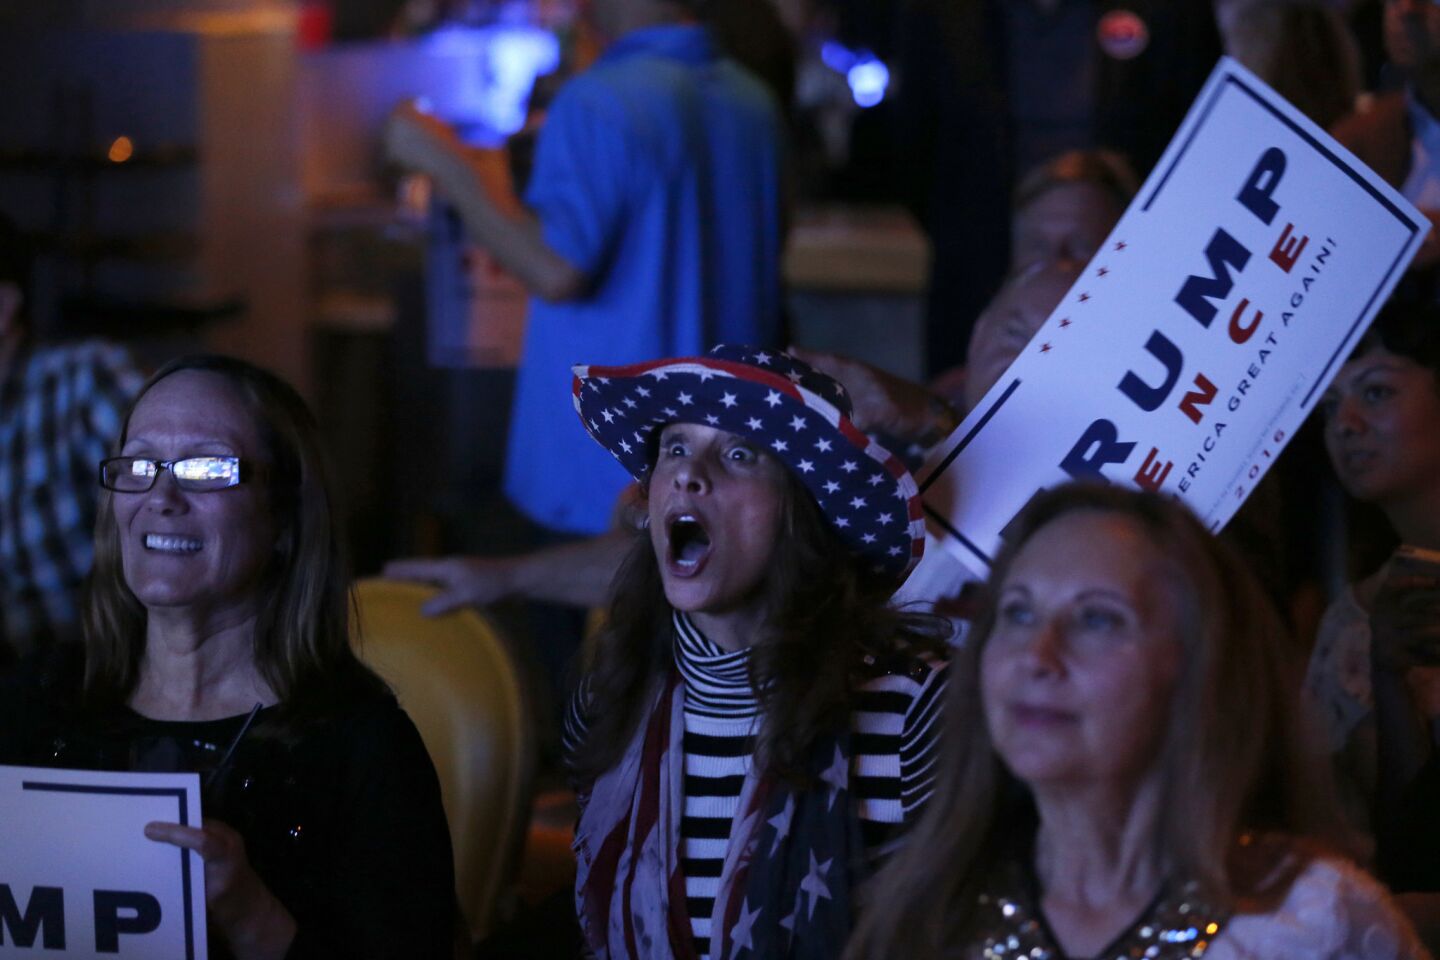 Republicans Sarah McDowell, center, of Westminster, reacts while watching election night results at the OCGOP election party at China Palace in Newport Beach.